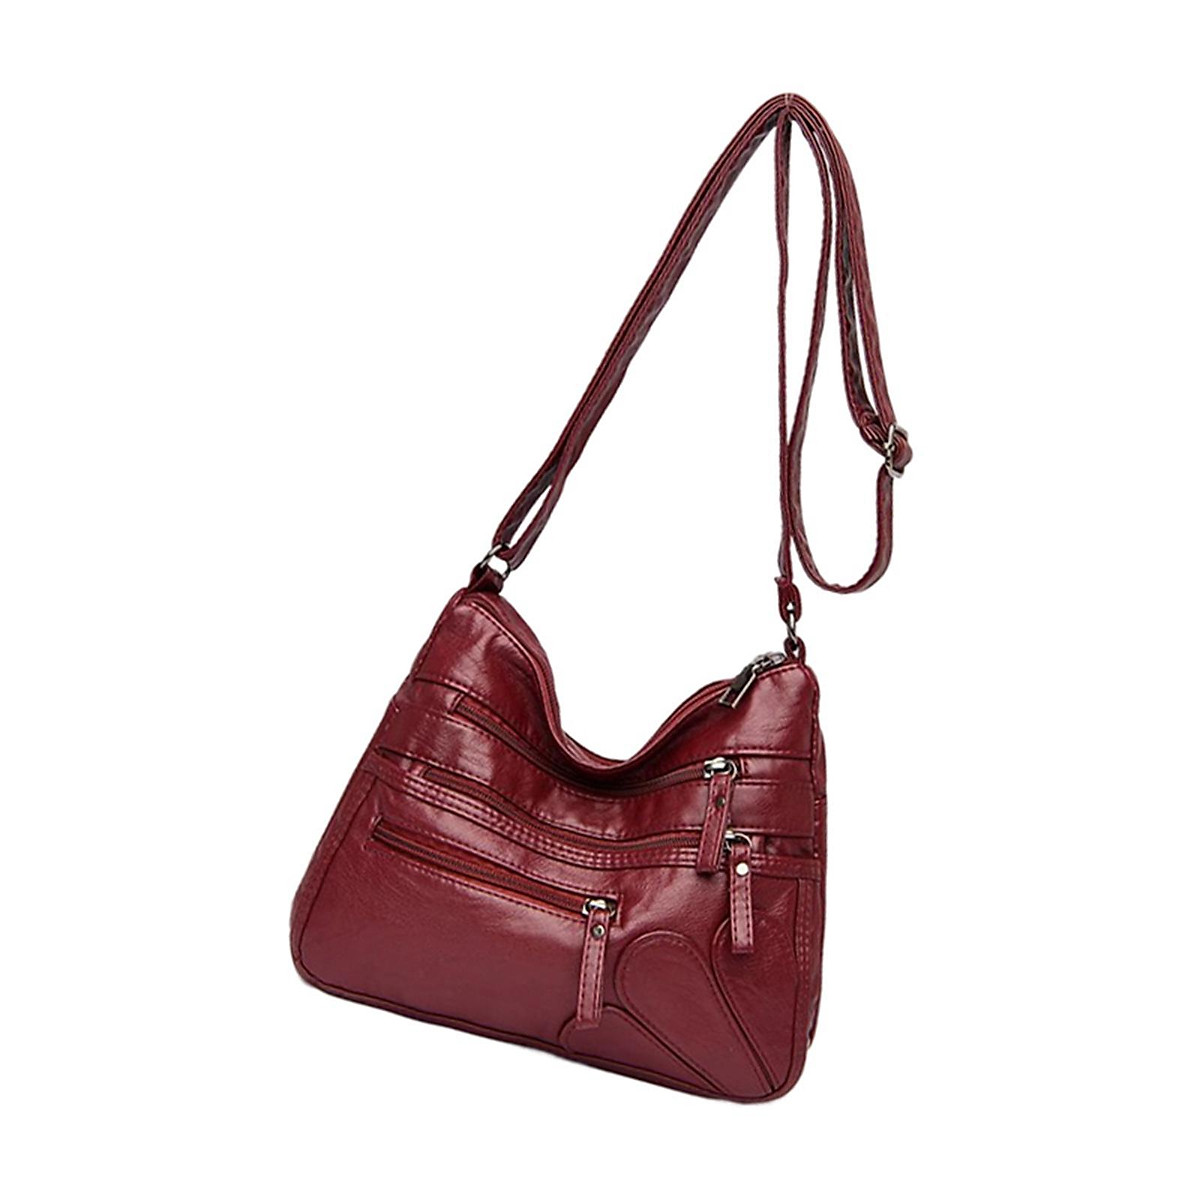 Red Leather Hobo Bag - Slouchy Leather Purse For Women | Laroll Bags